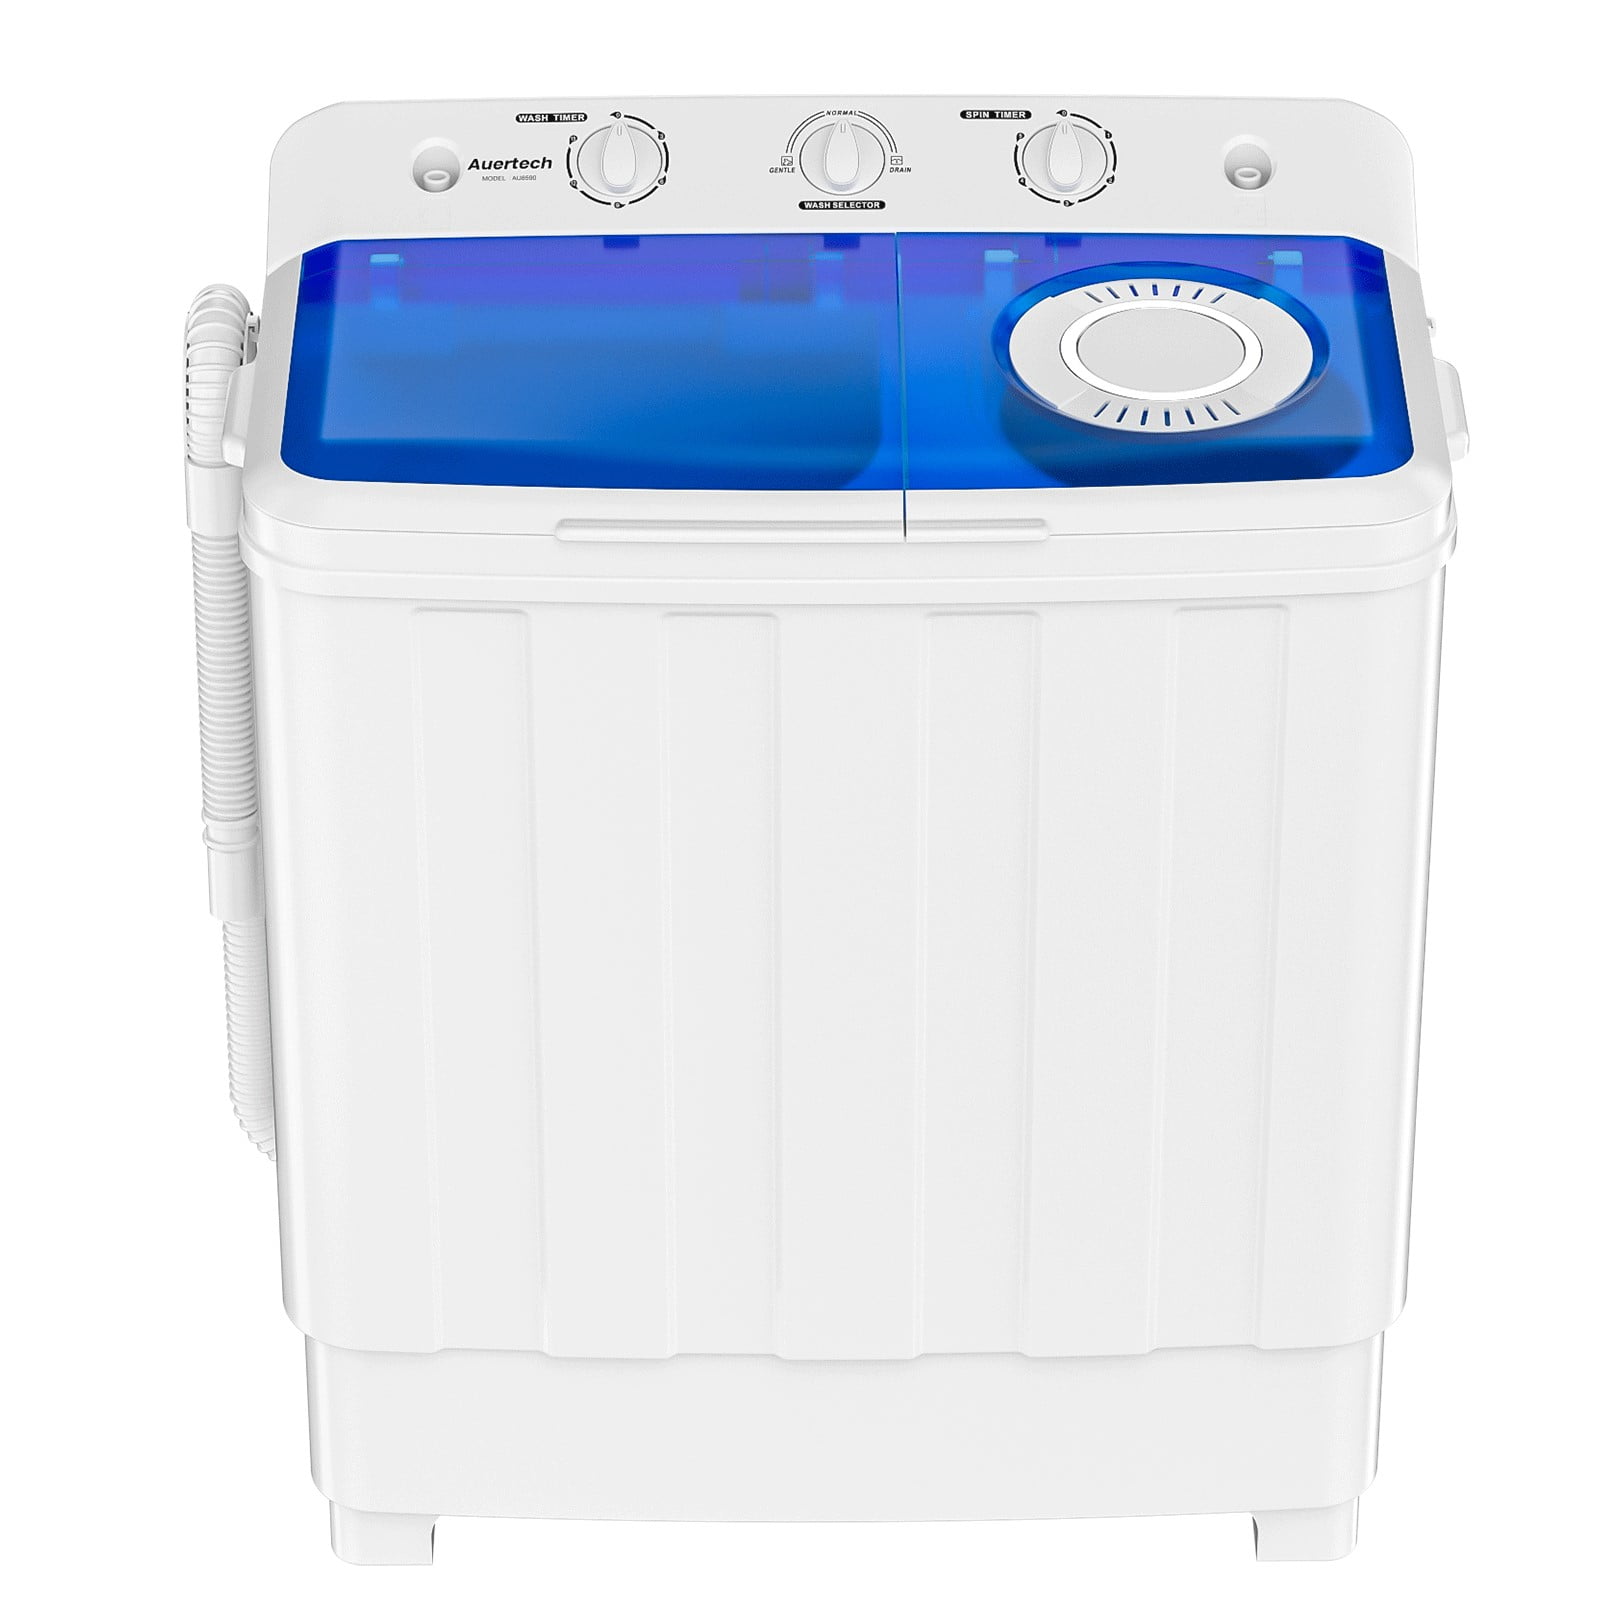 Muhub Portable Mini Washing Machine, Small Washer no dryer, 7.7lbs  Semi-Automatic Compact Washer Machine, Laundry Washer for Home Apartment  RV, Blue